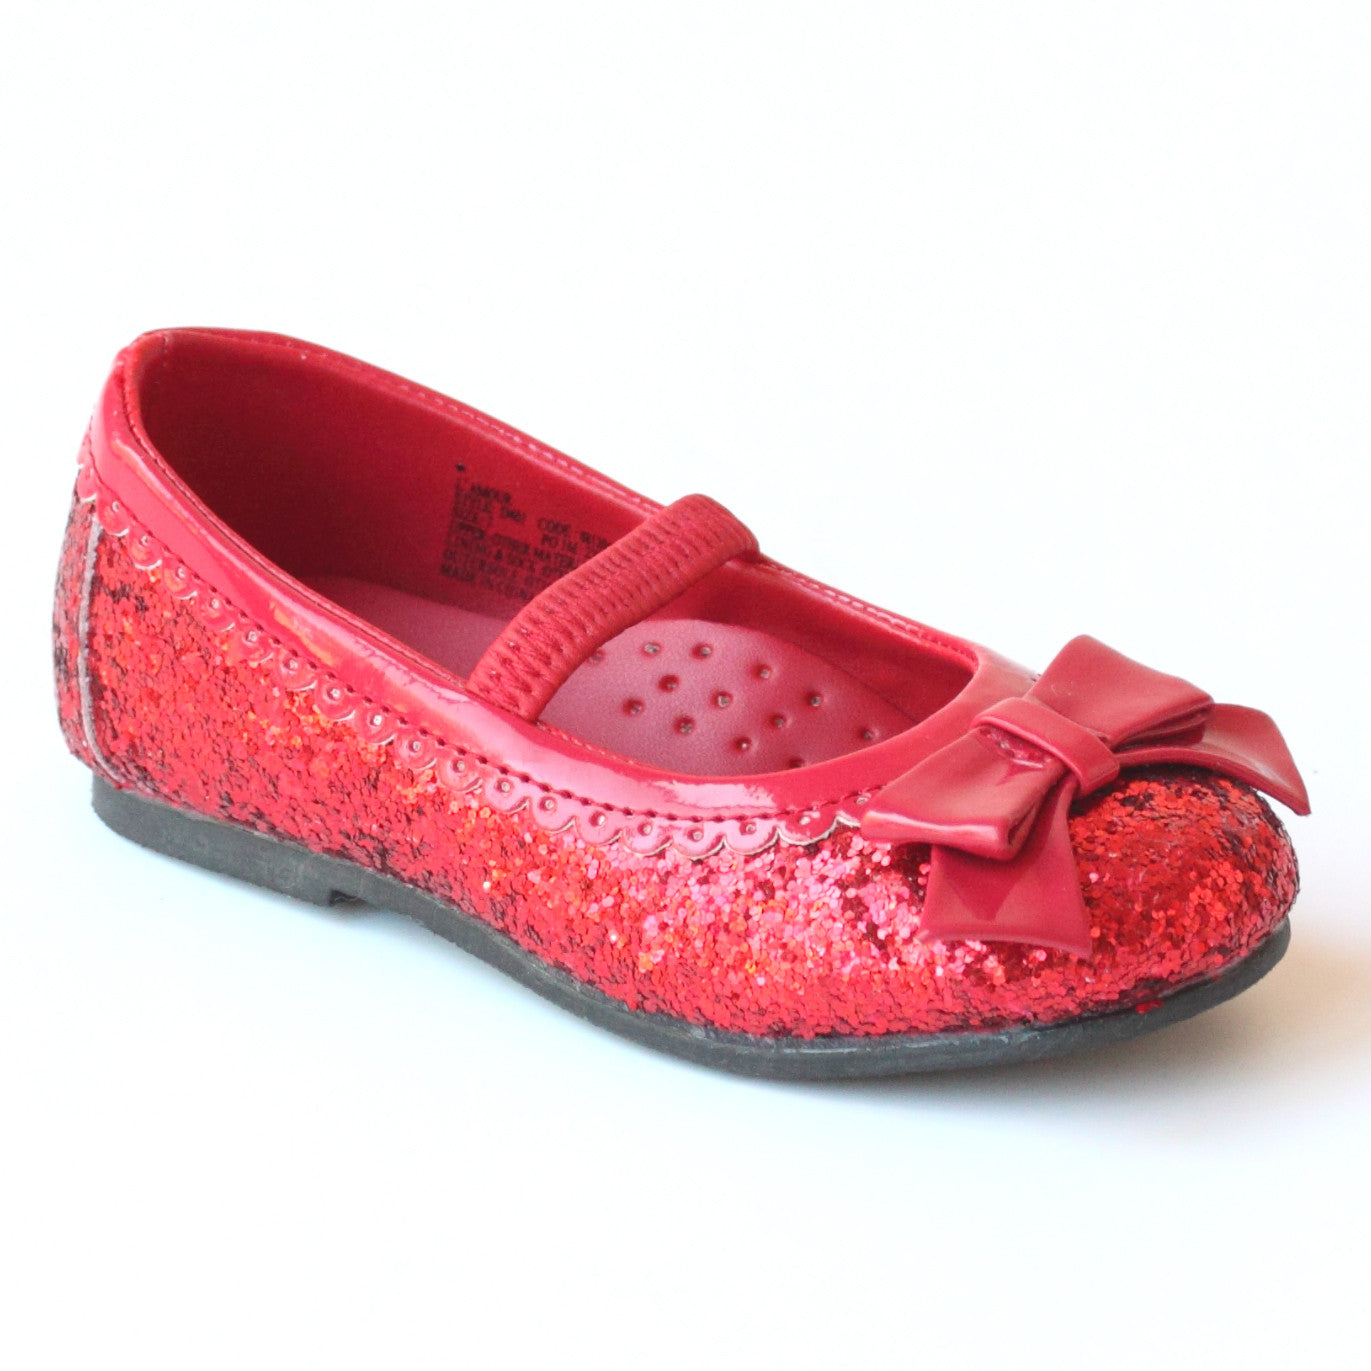 Dreamy Flat Loafer - 1A4MD0